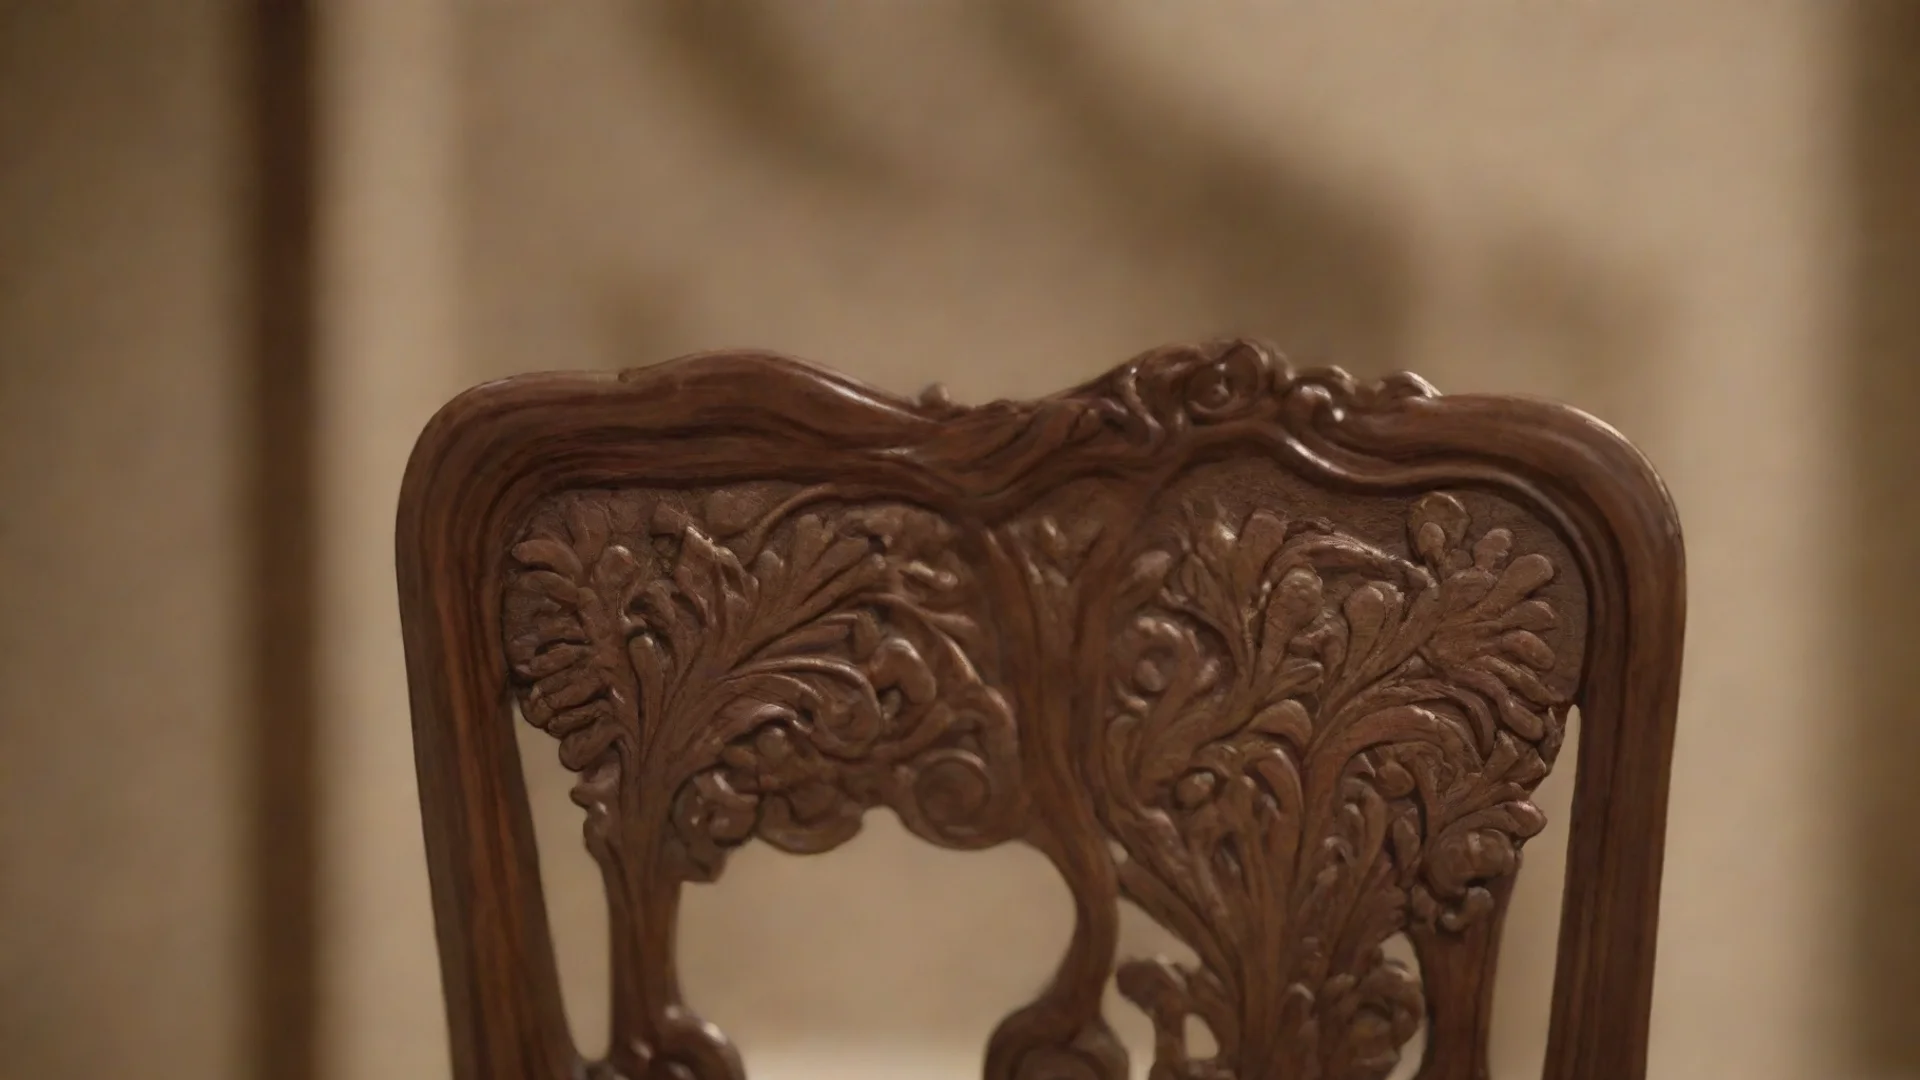 aidetail view of a decorated chair back dark brown at the edge blurred with high craftsmanship hdwidescreen